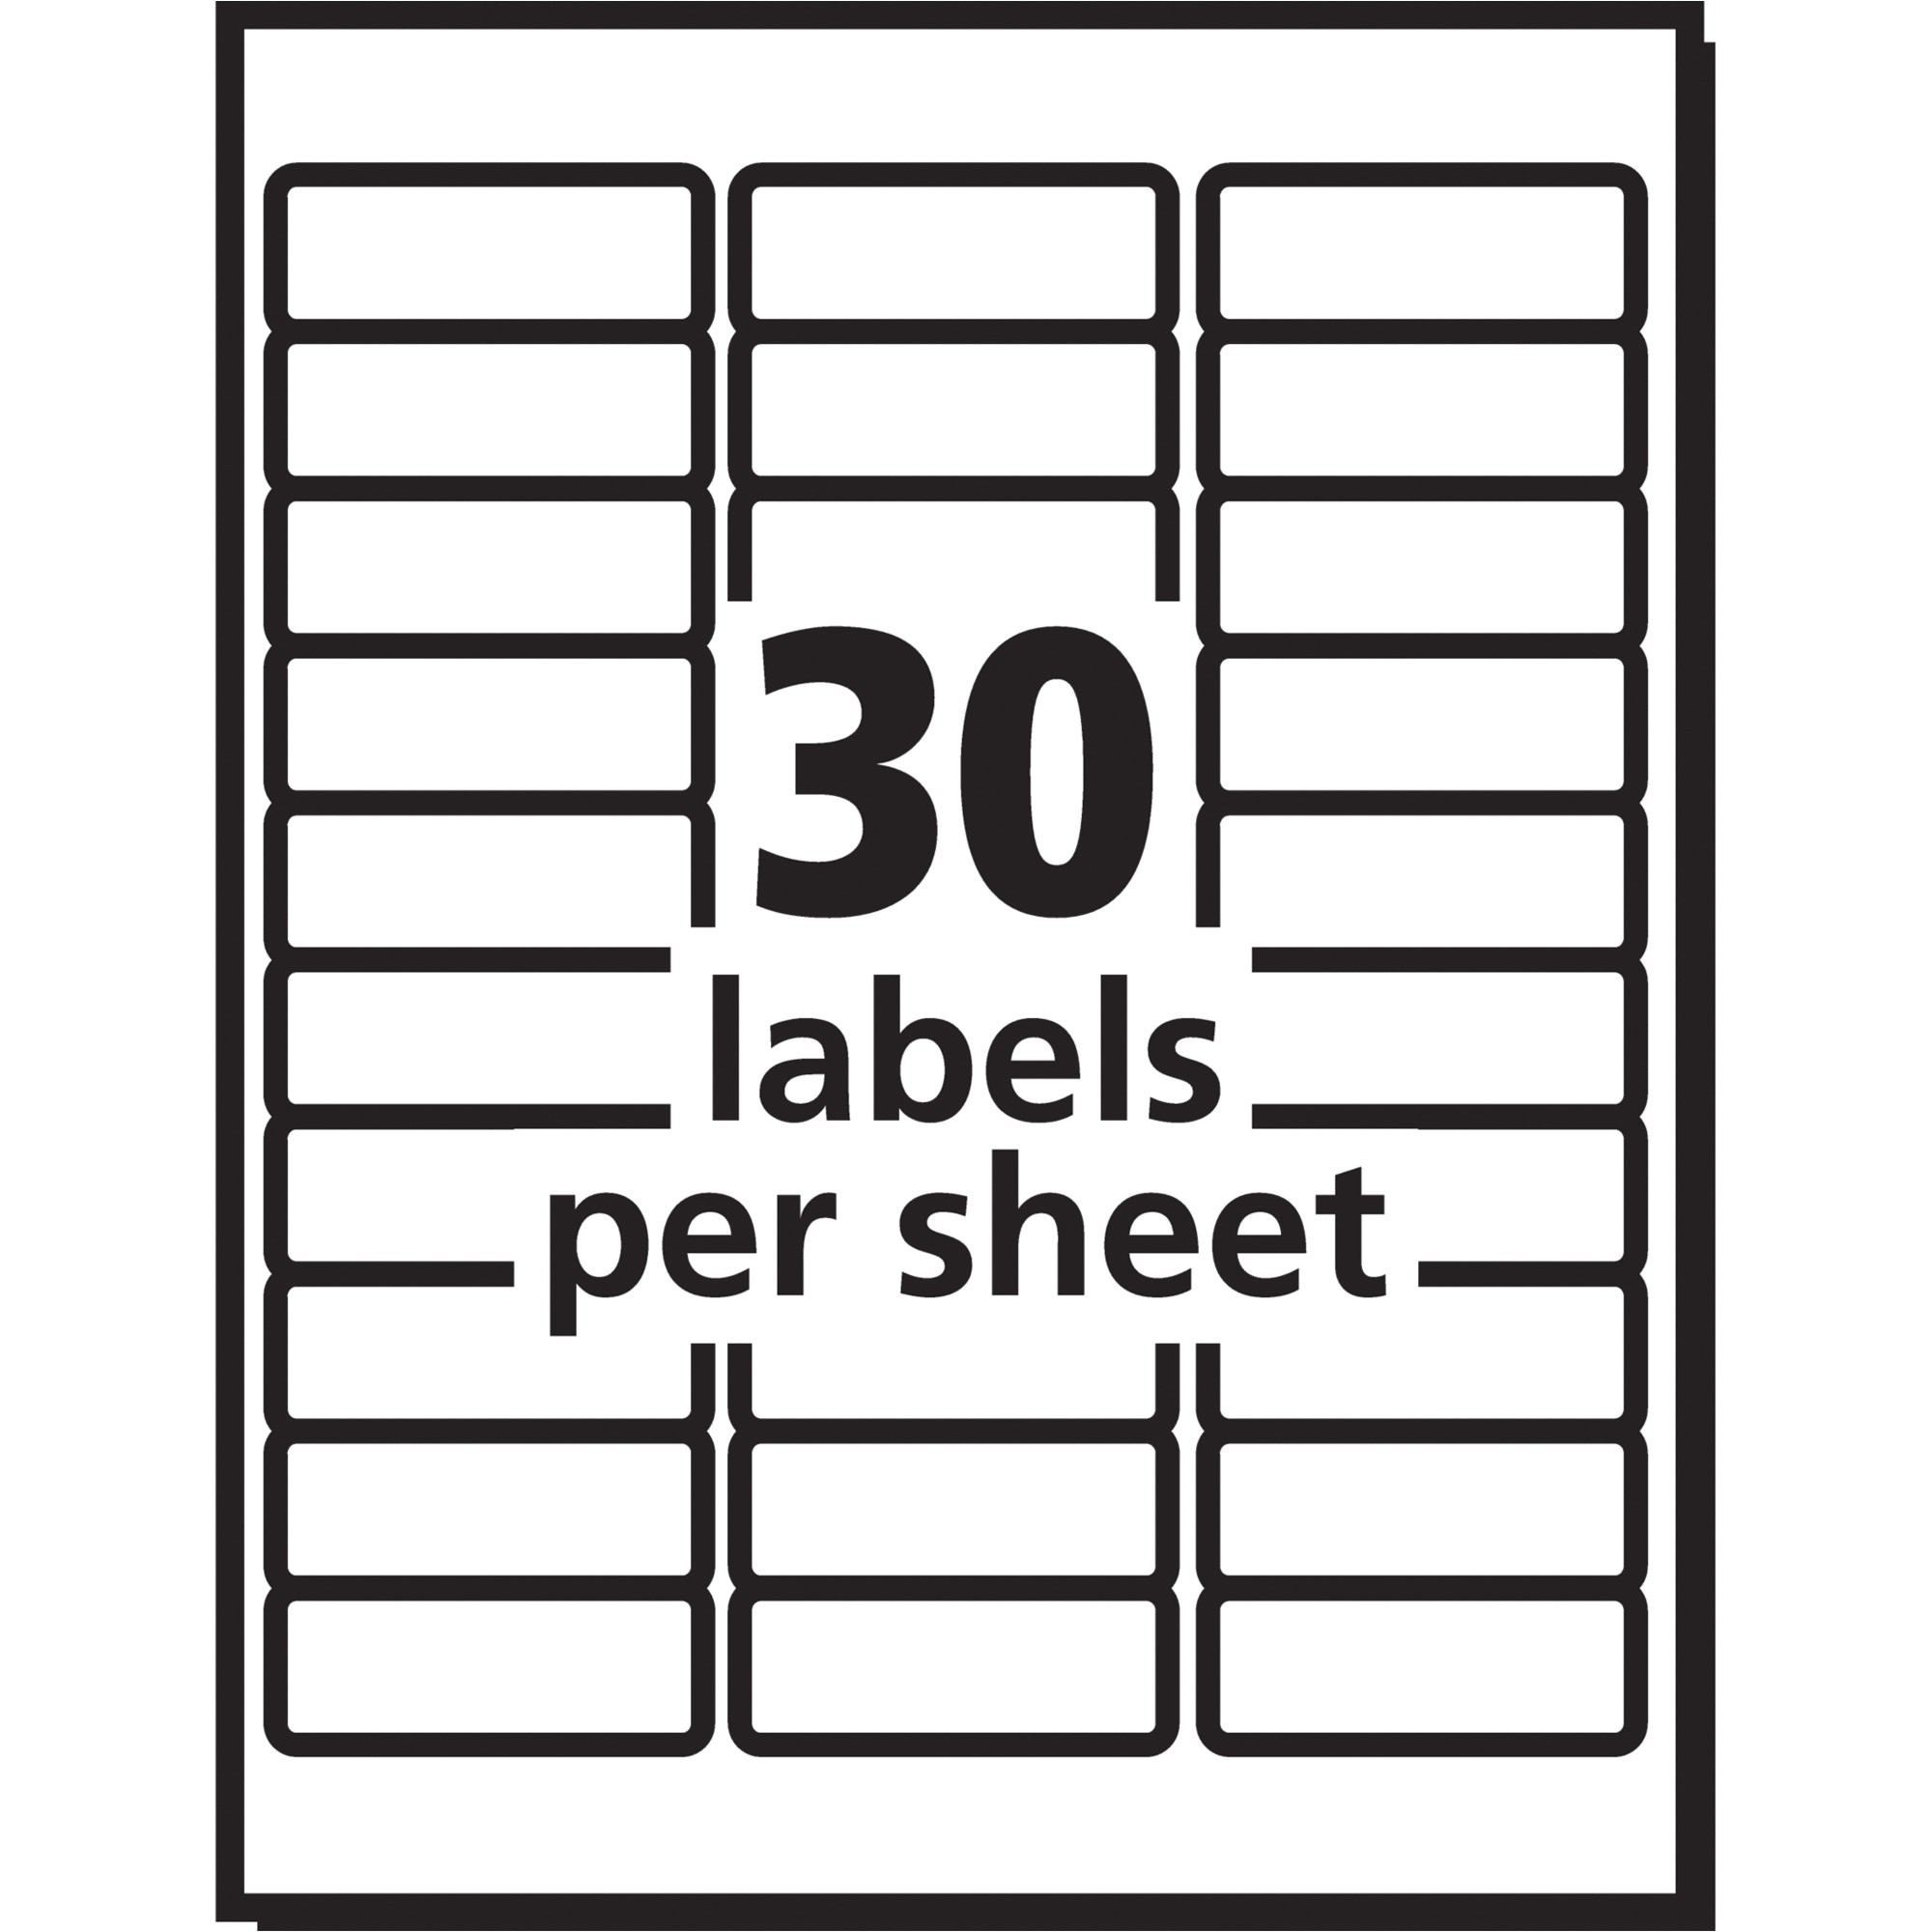 Avery 8160 Label Size Labels 2021